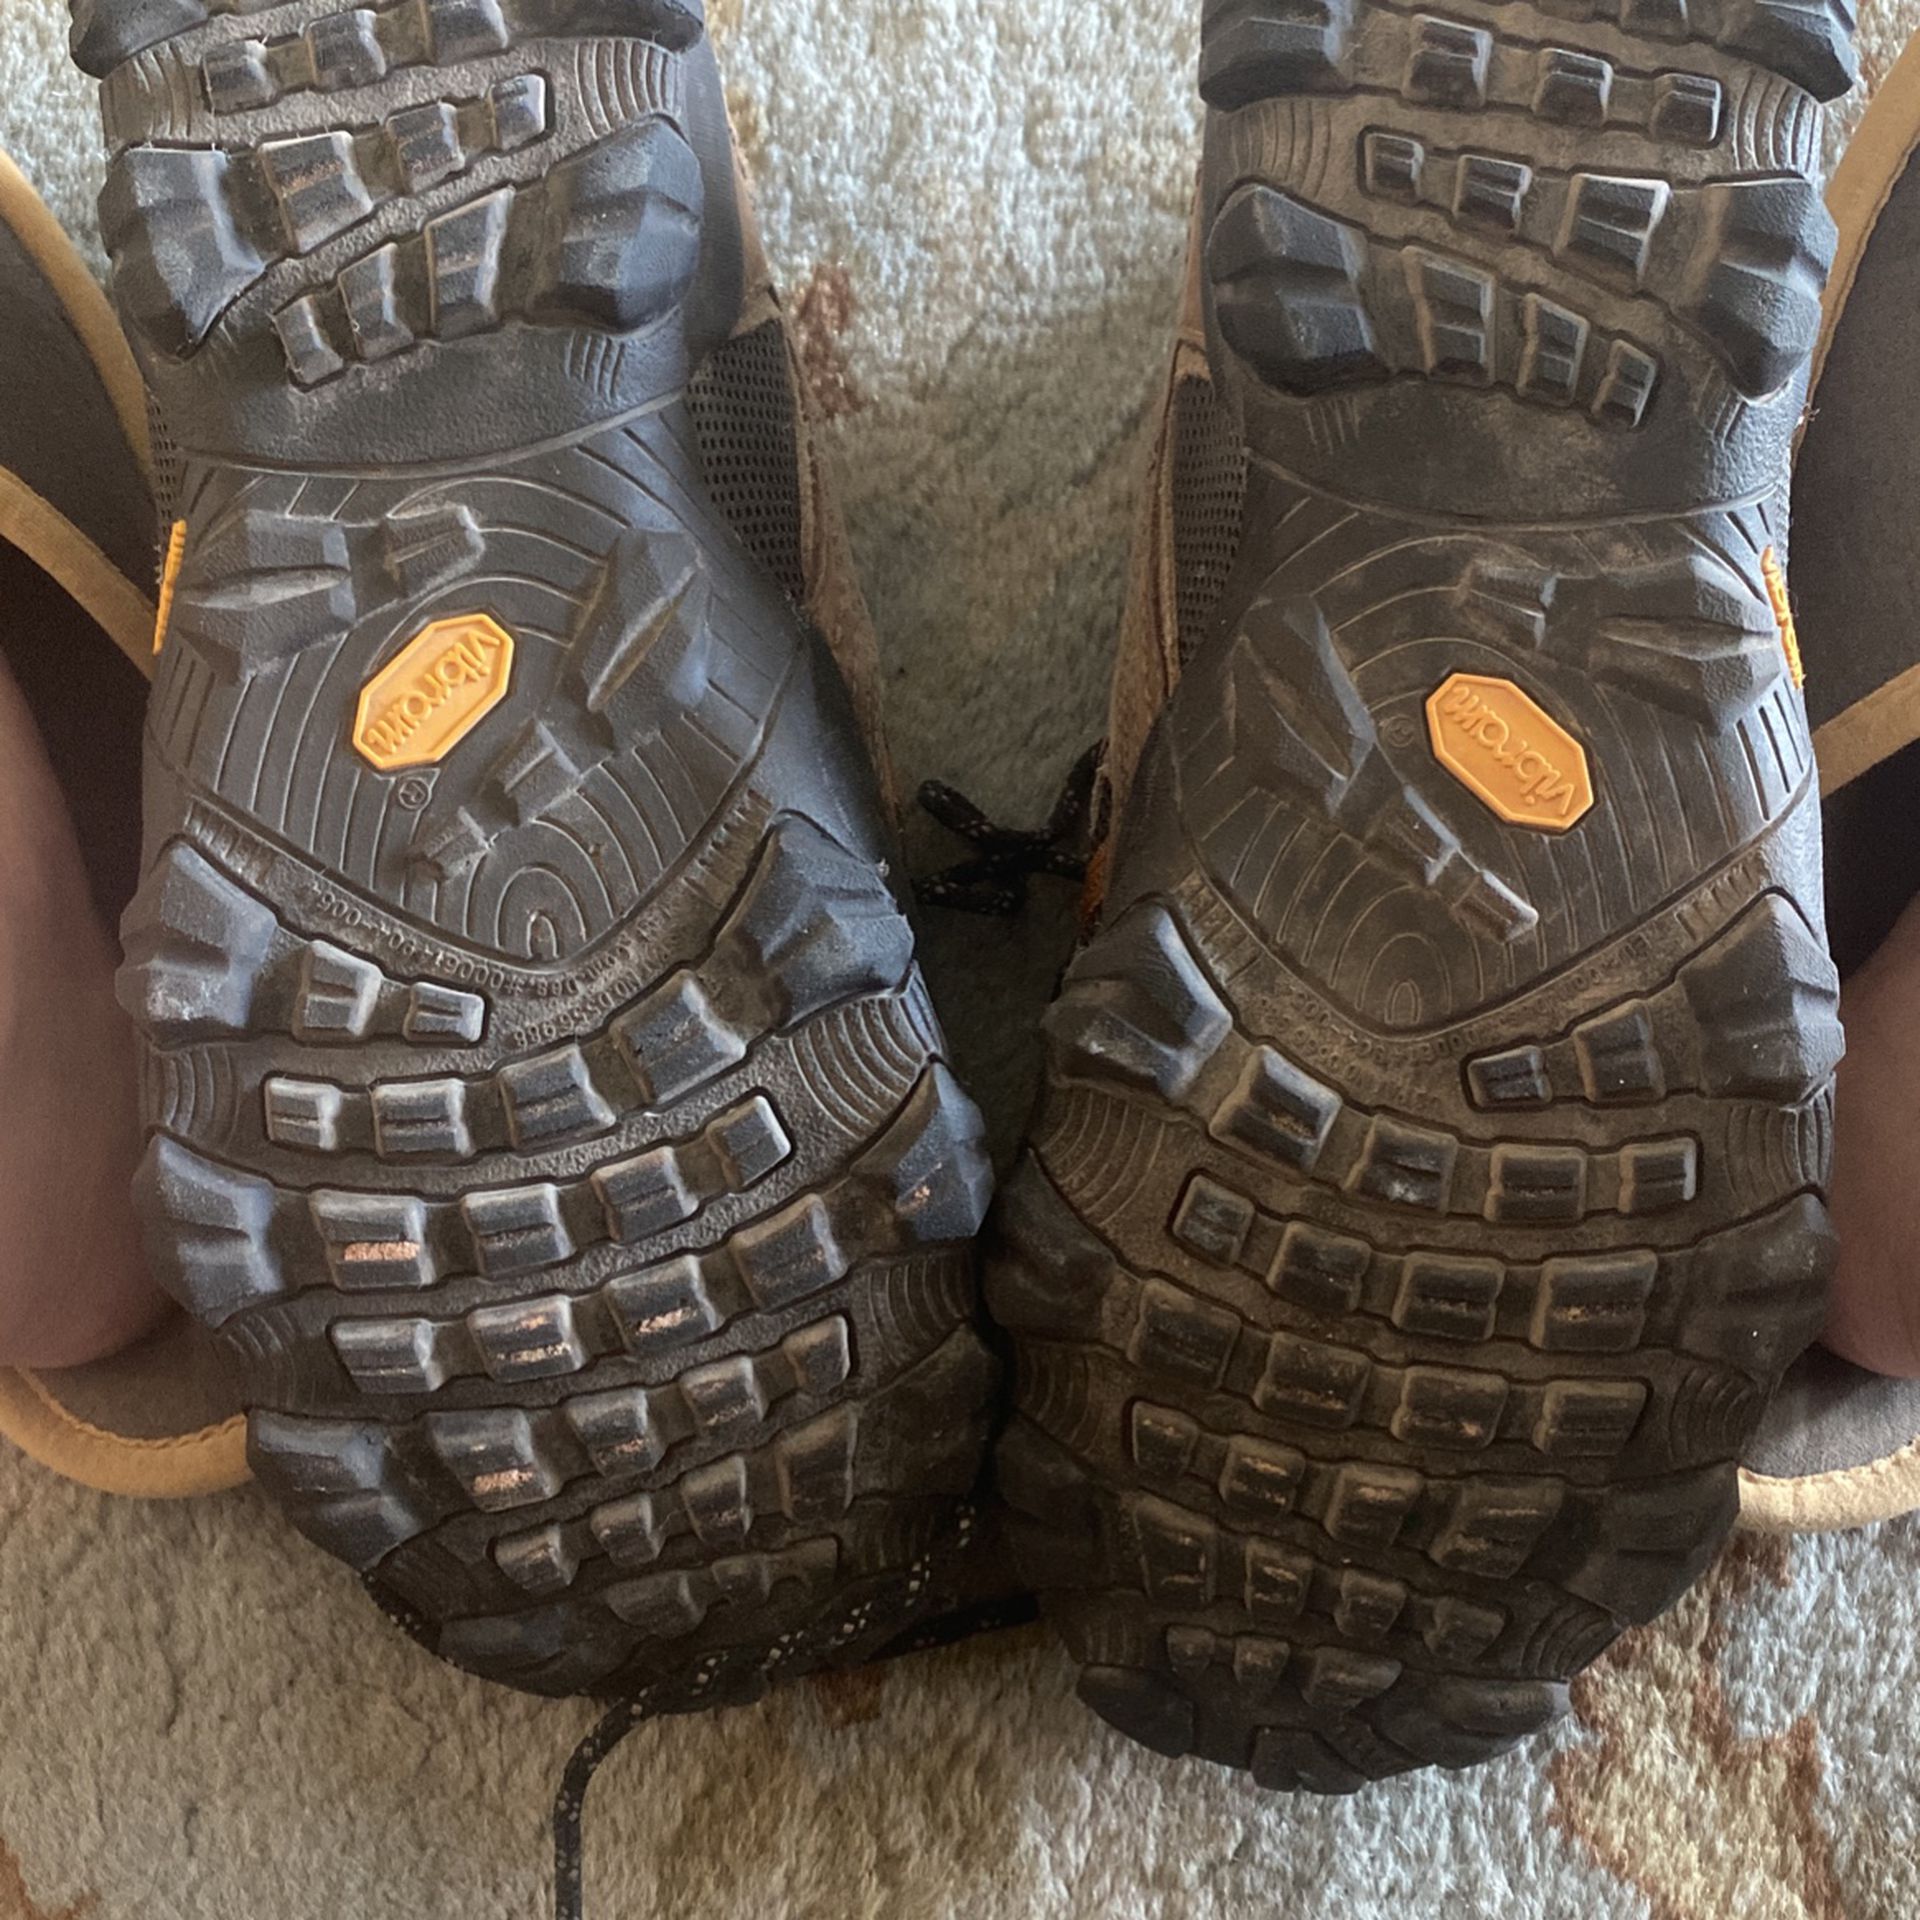 Patagonia Hiking Shoes for sale Size 10.5